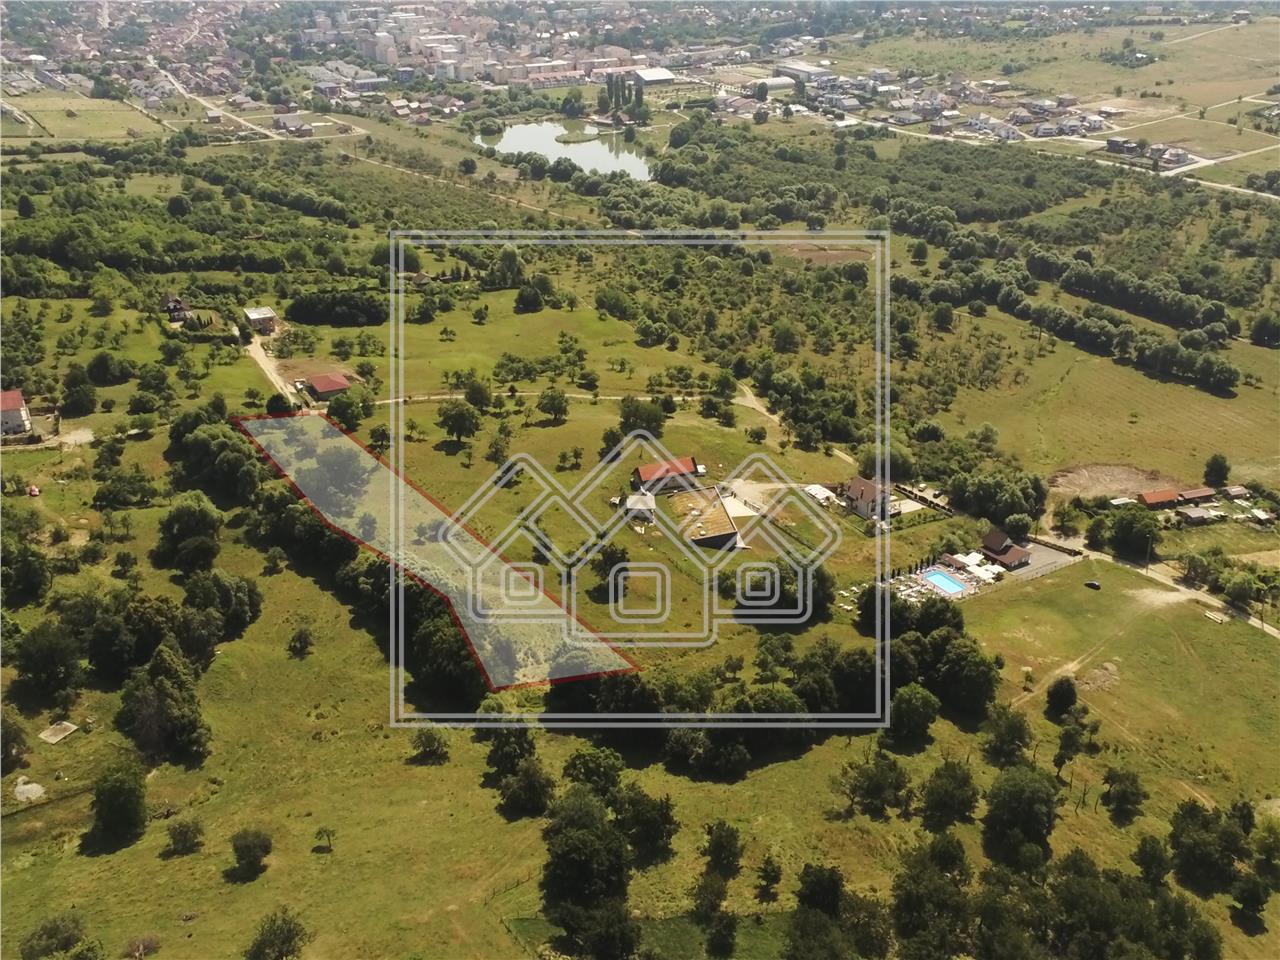 Land for sale in Sibiu